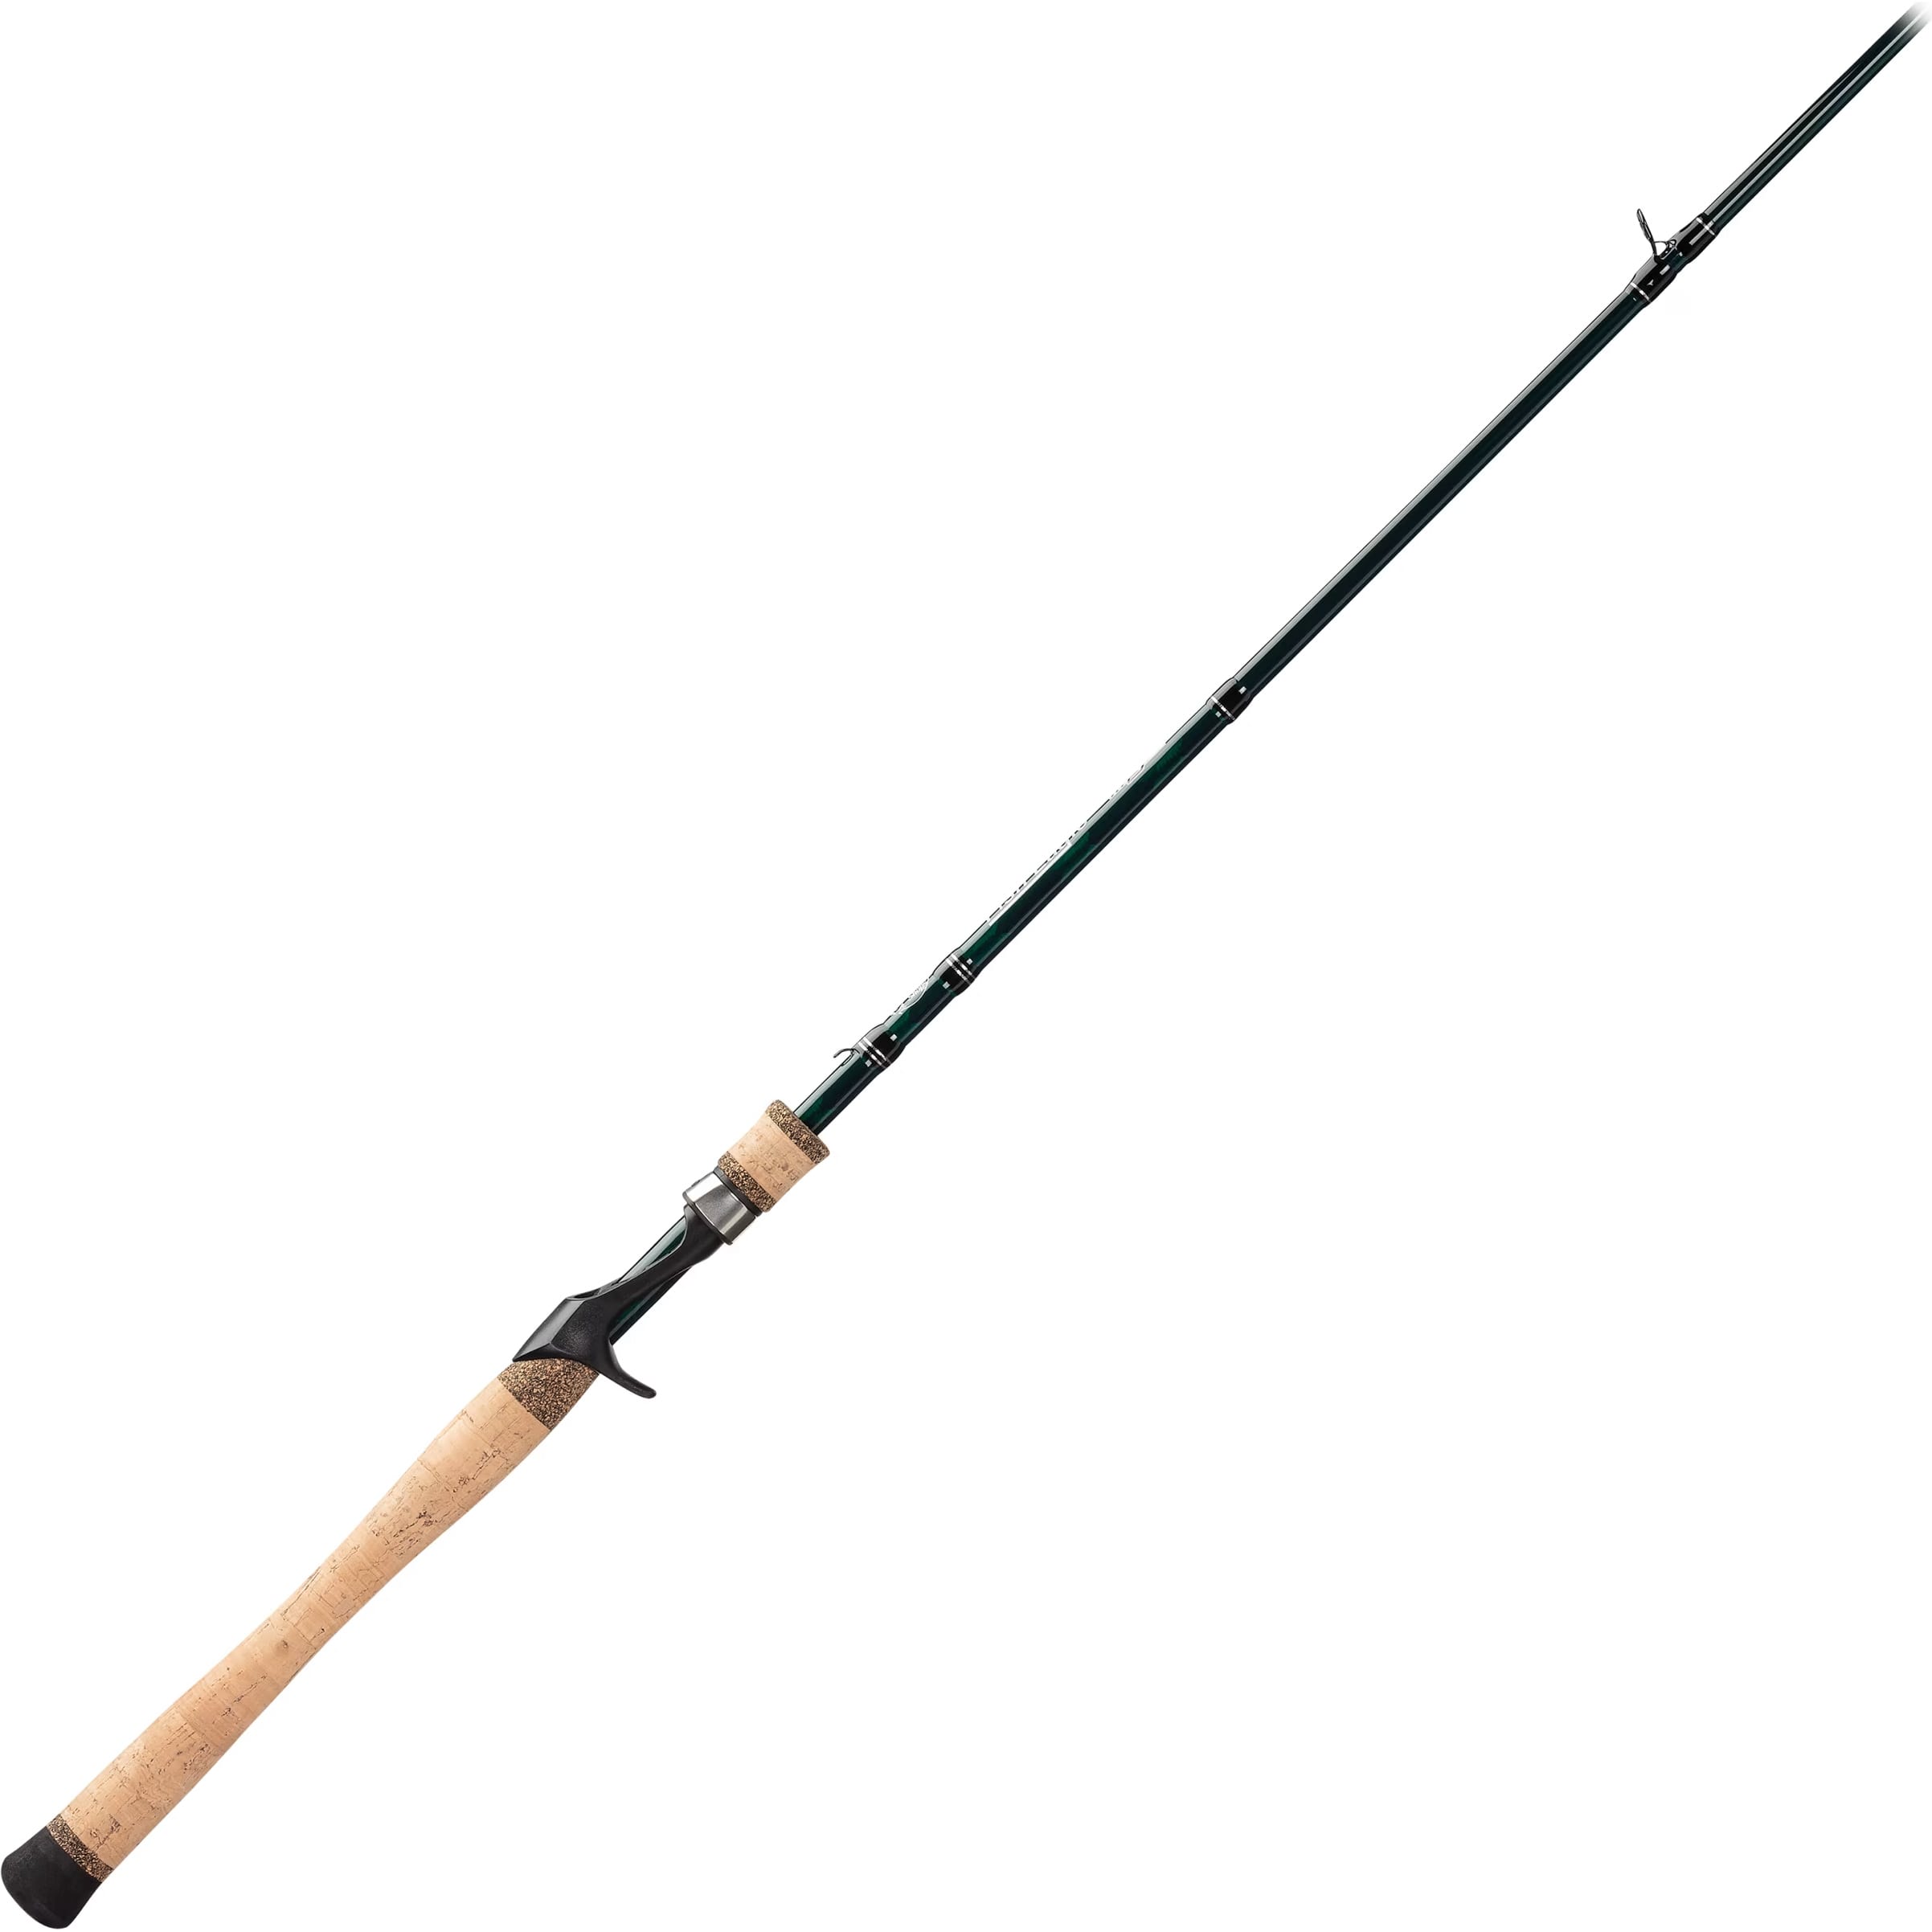 MICRO SERIES ULTRA LIGHT 7' ROD REVIEW - Shakespeare